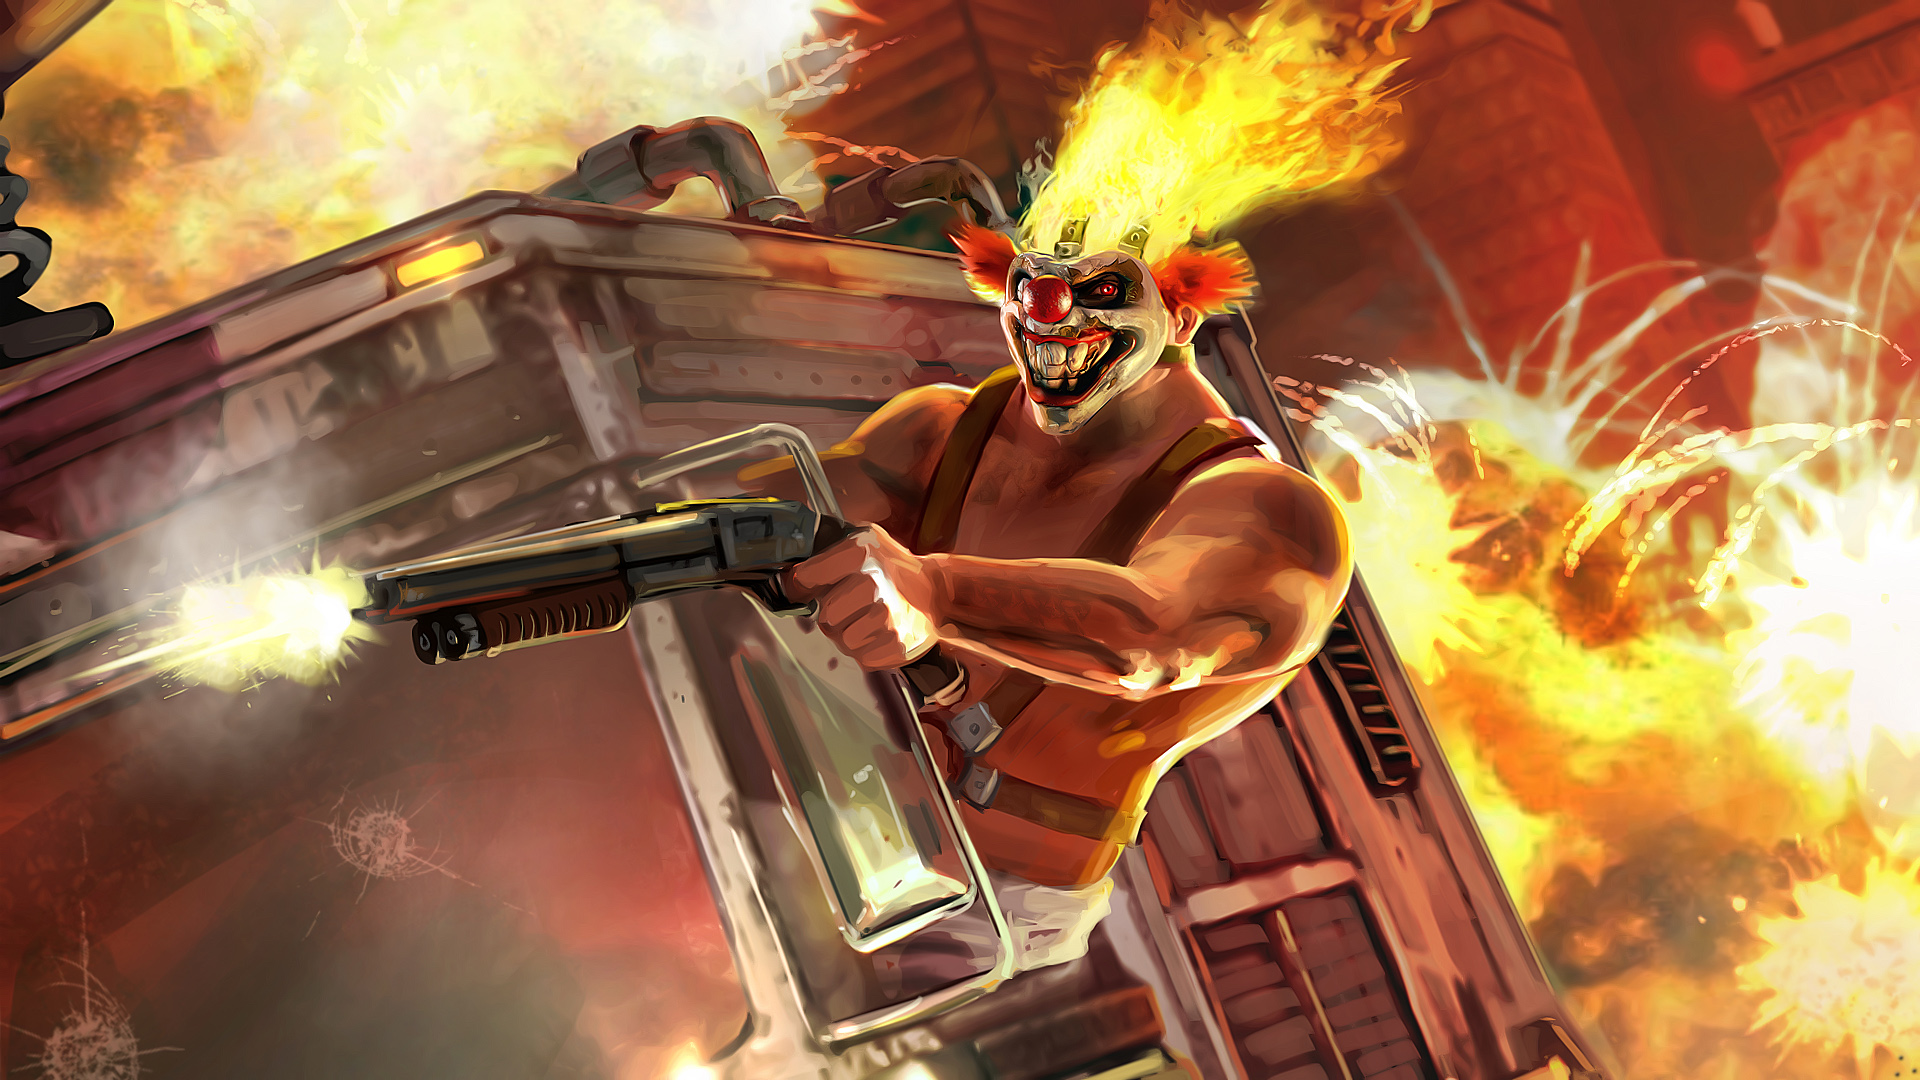 Twisted Metal 2011 Wallpapers in HD